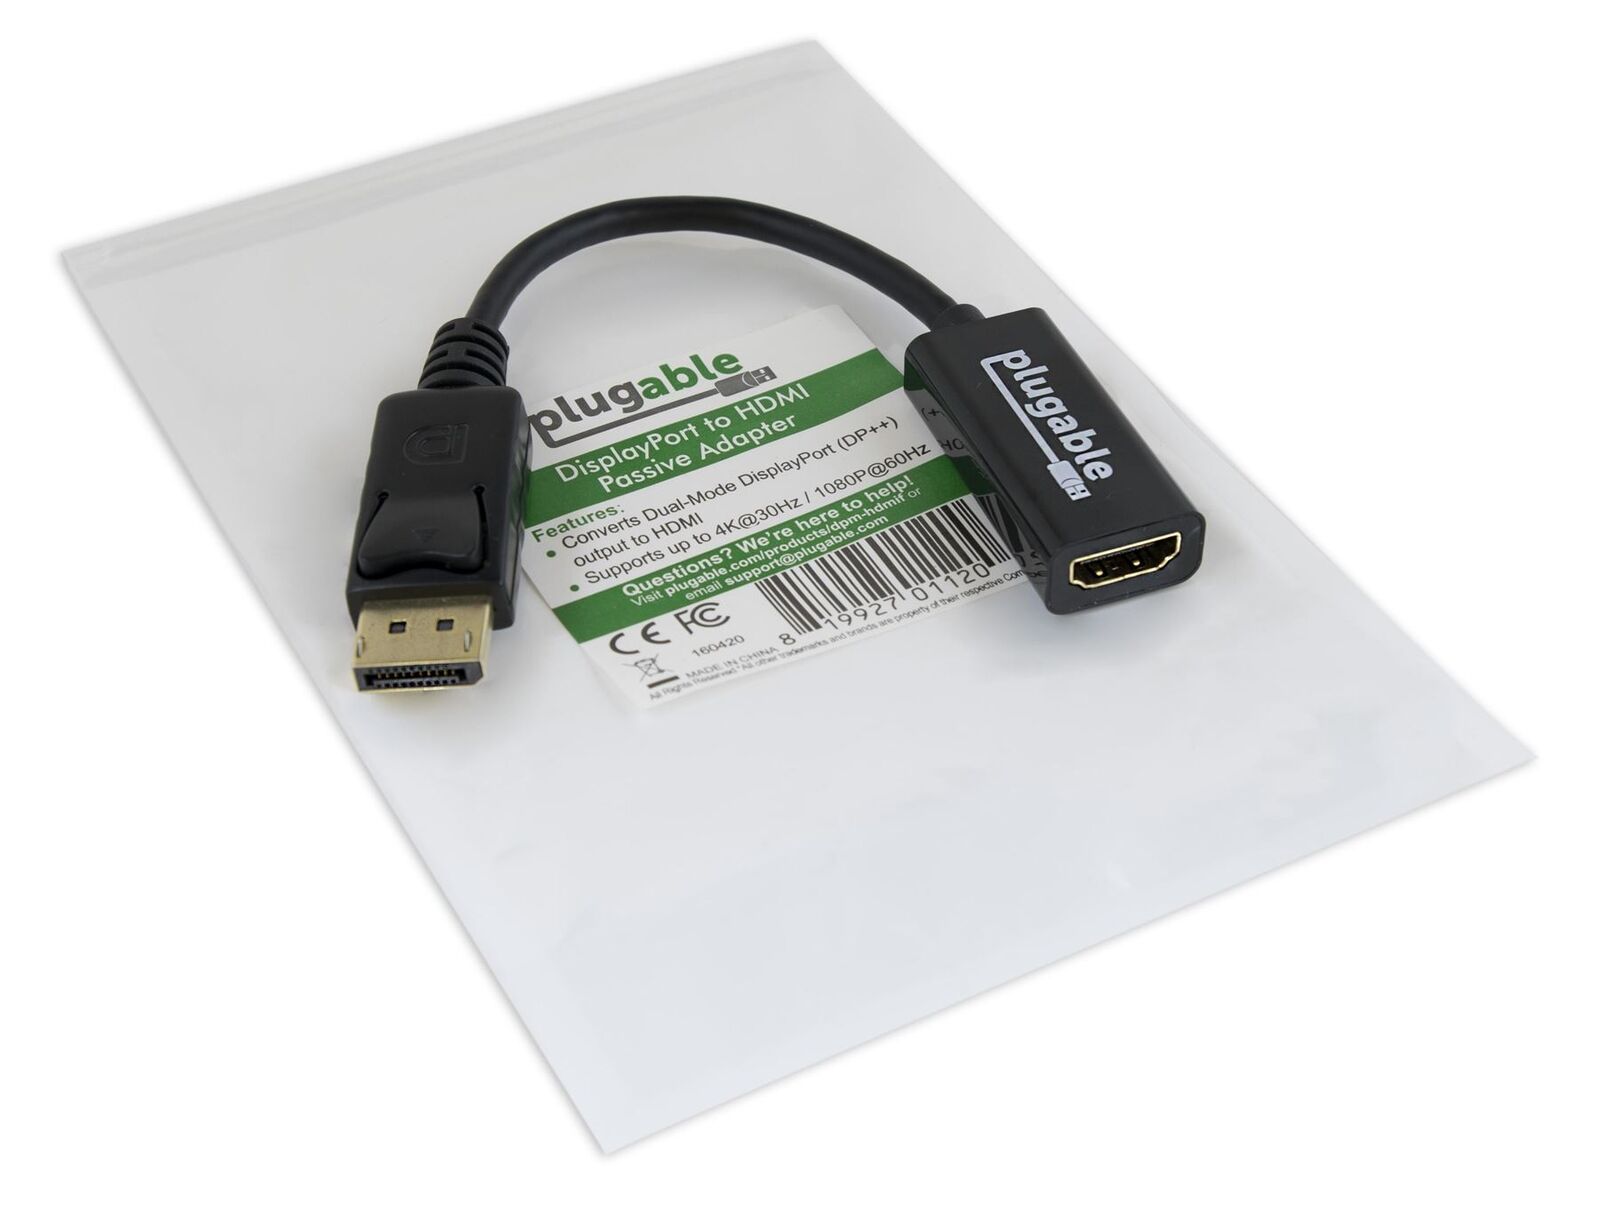 Plugable Technologies DisplayPort to HDMI Passive Adapter - Supports Windows and